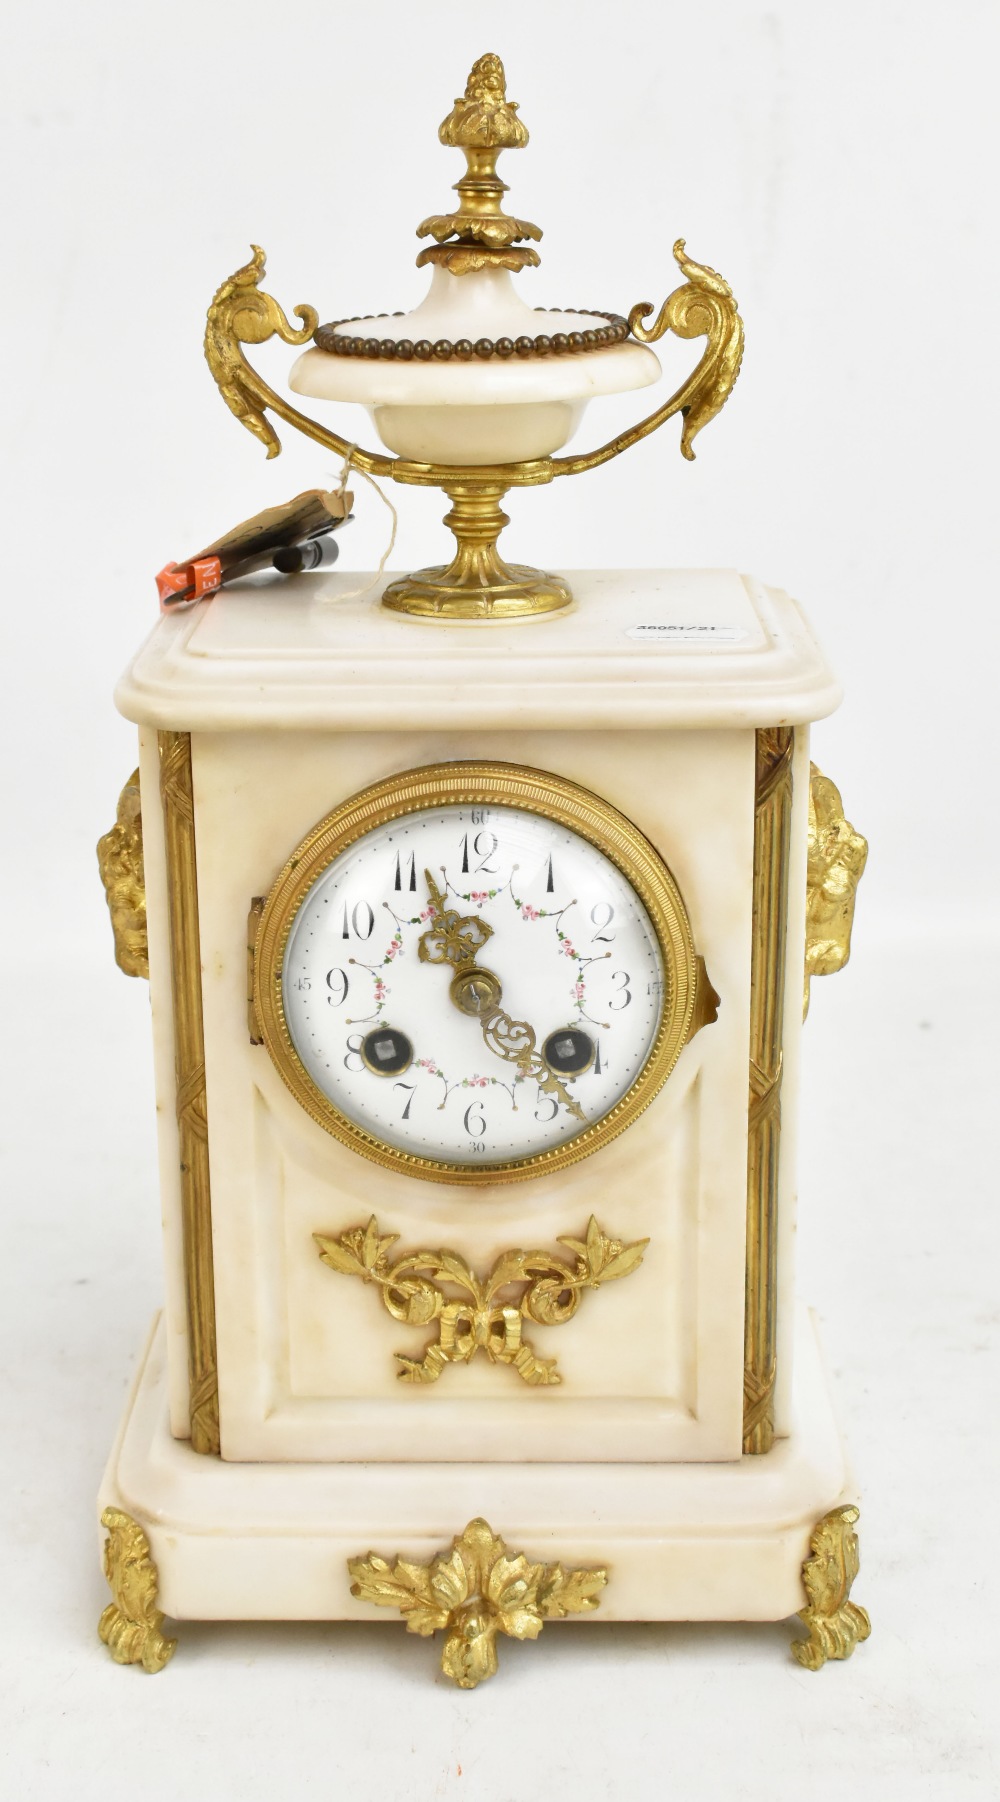 A 19th century alabaster mantel clock with gilt metal mounts and urn finial, the circular painted